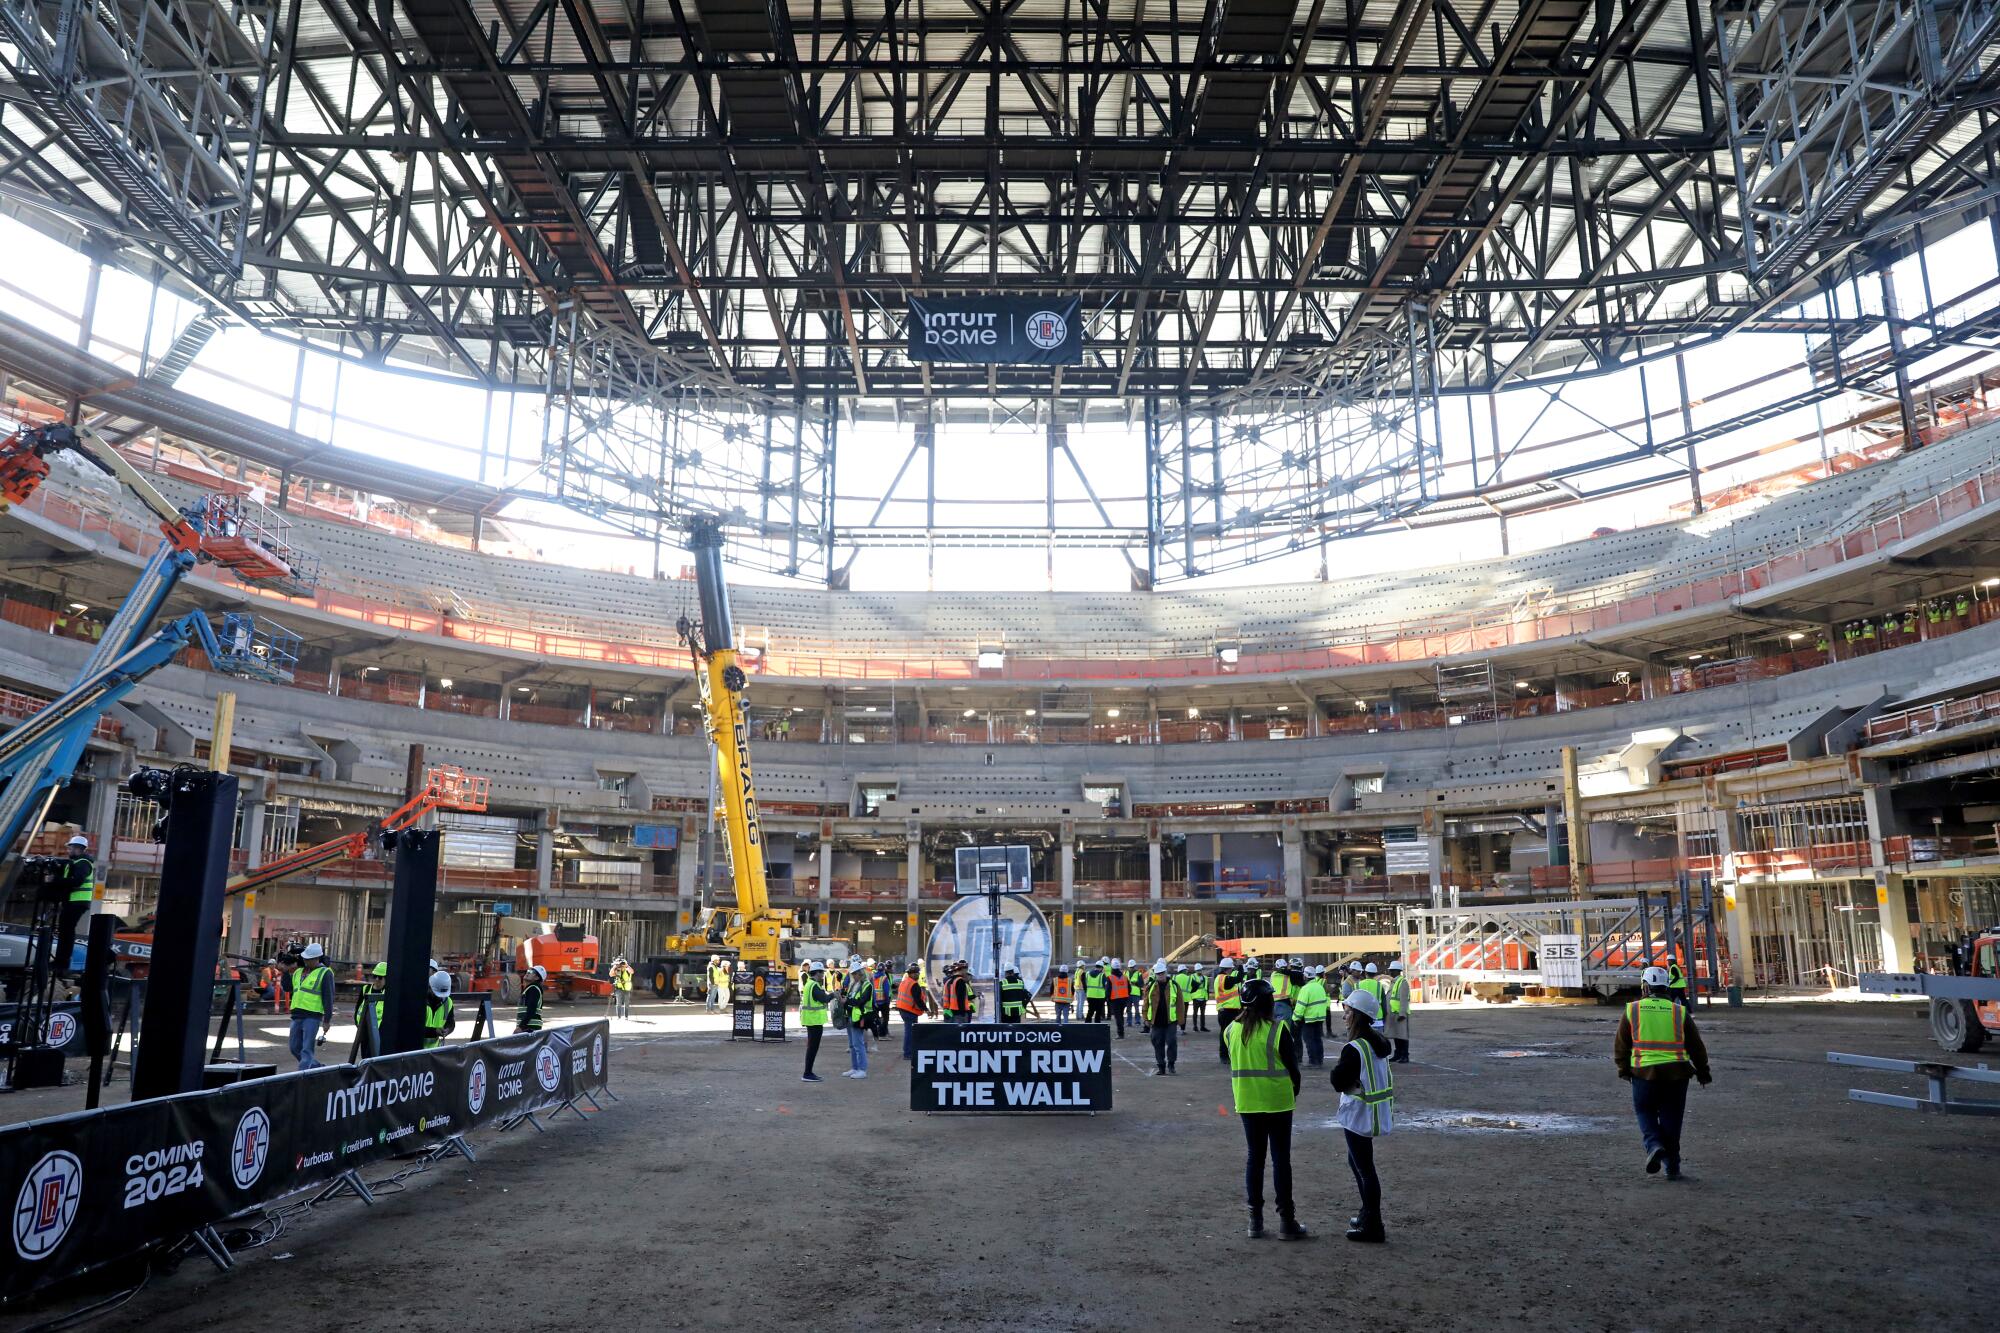 Top Contractors Chosen for Clippers Arena : PaintSquare News